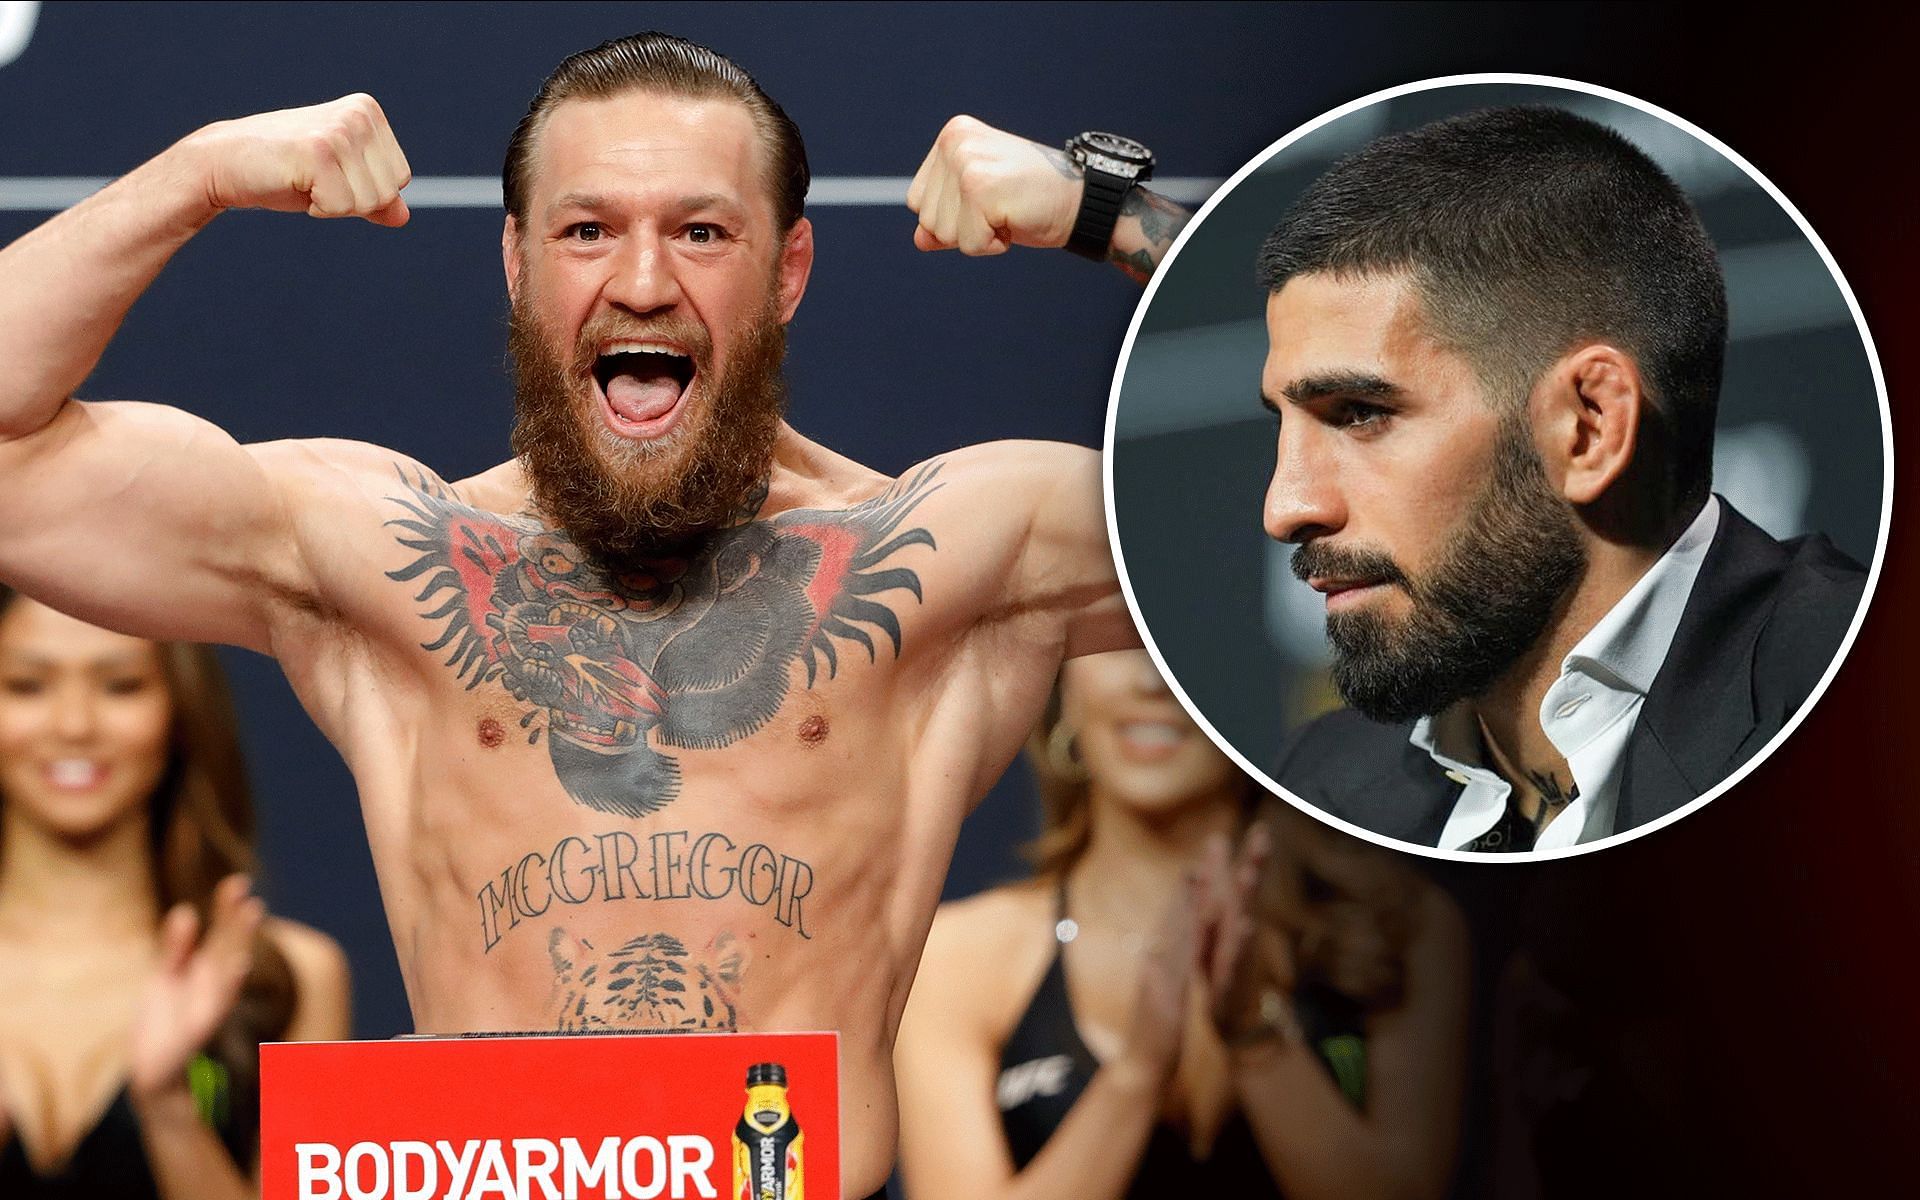 Ilia Topuria (right) explains why he wants to face Conor McGregor (left) [Images via: @iliatopuria on Instagram and Getty]